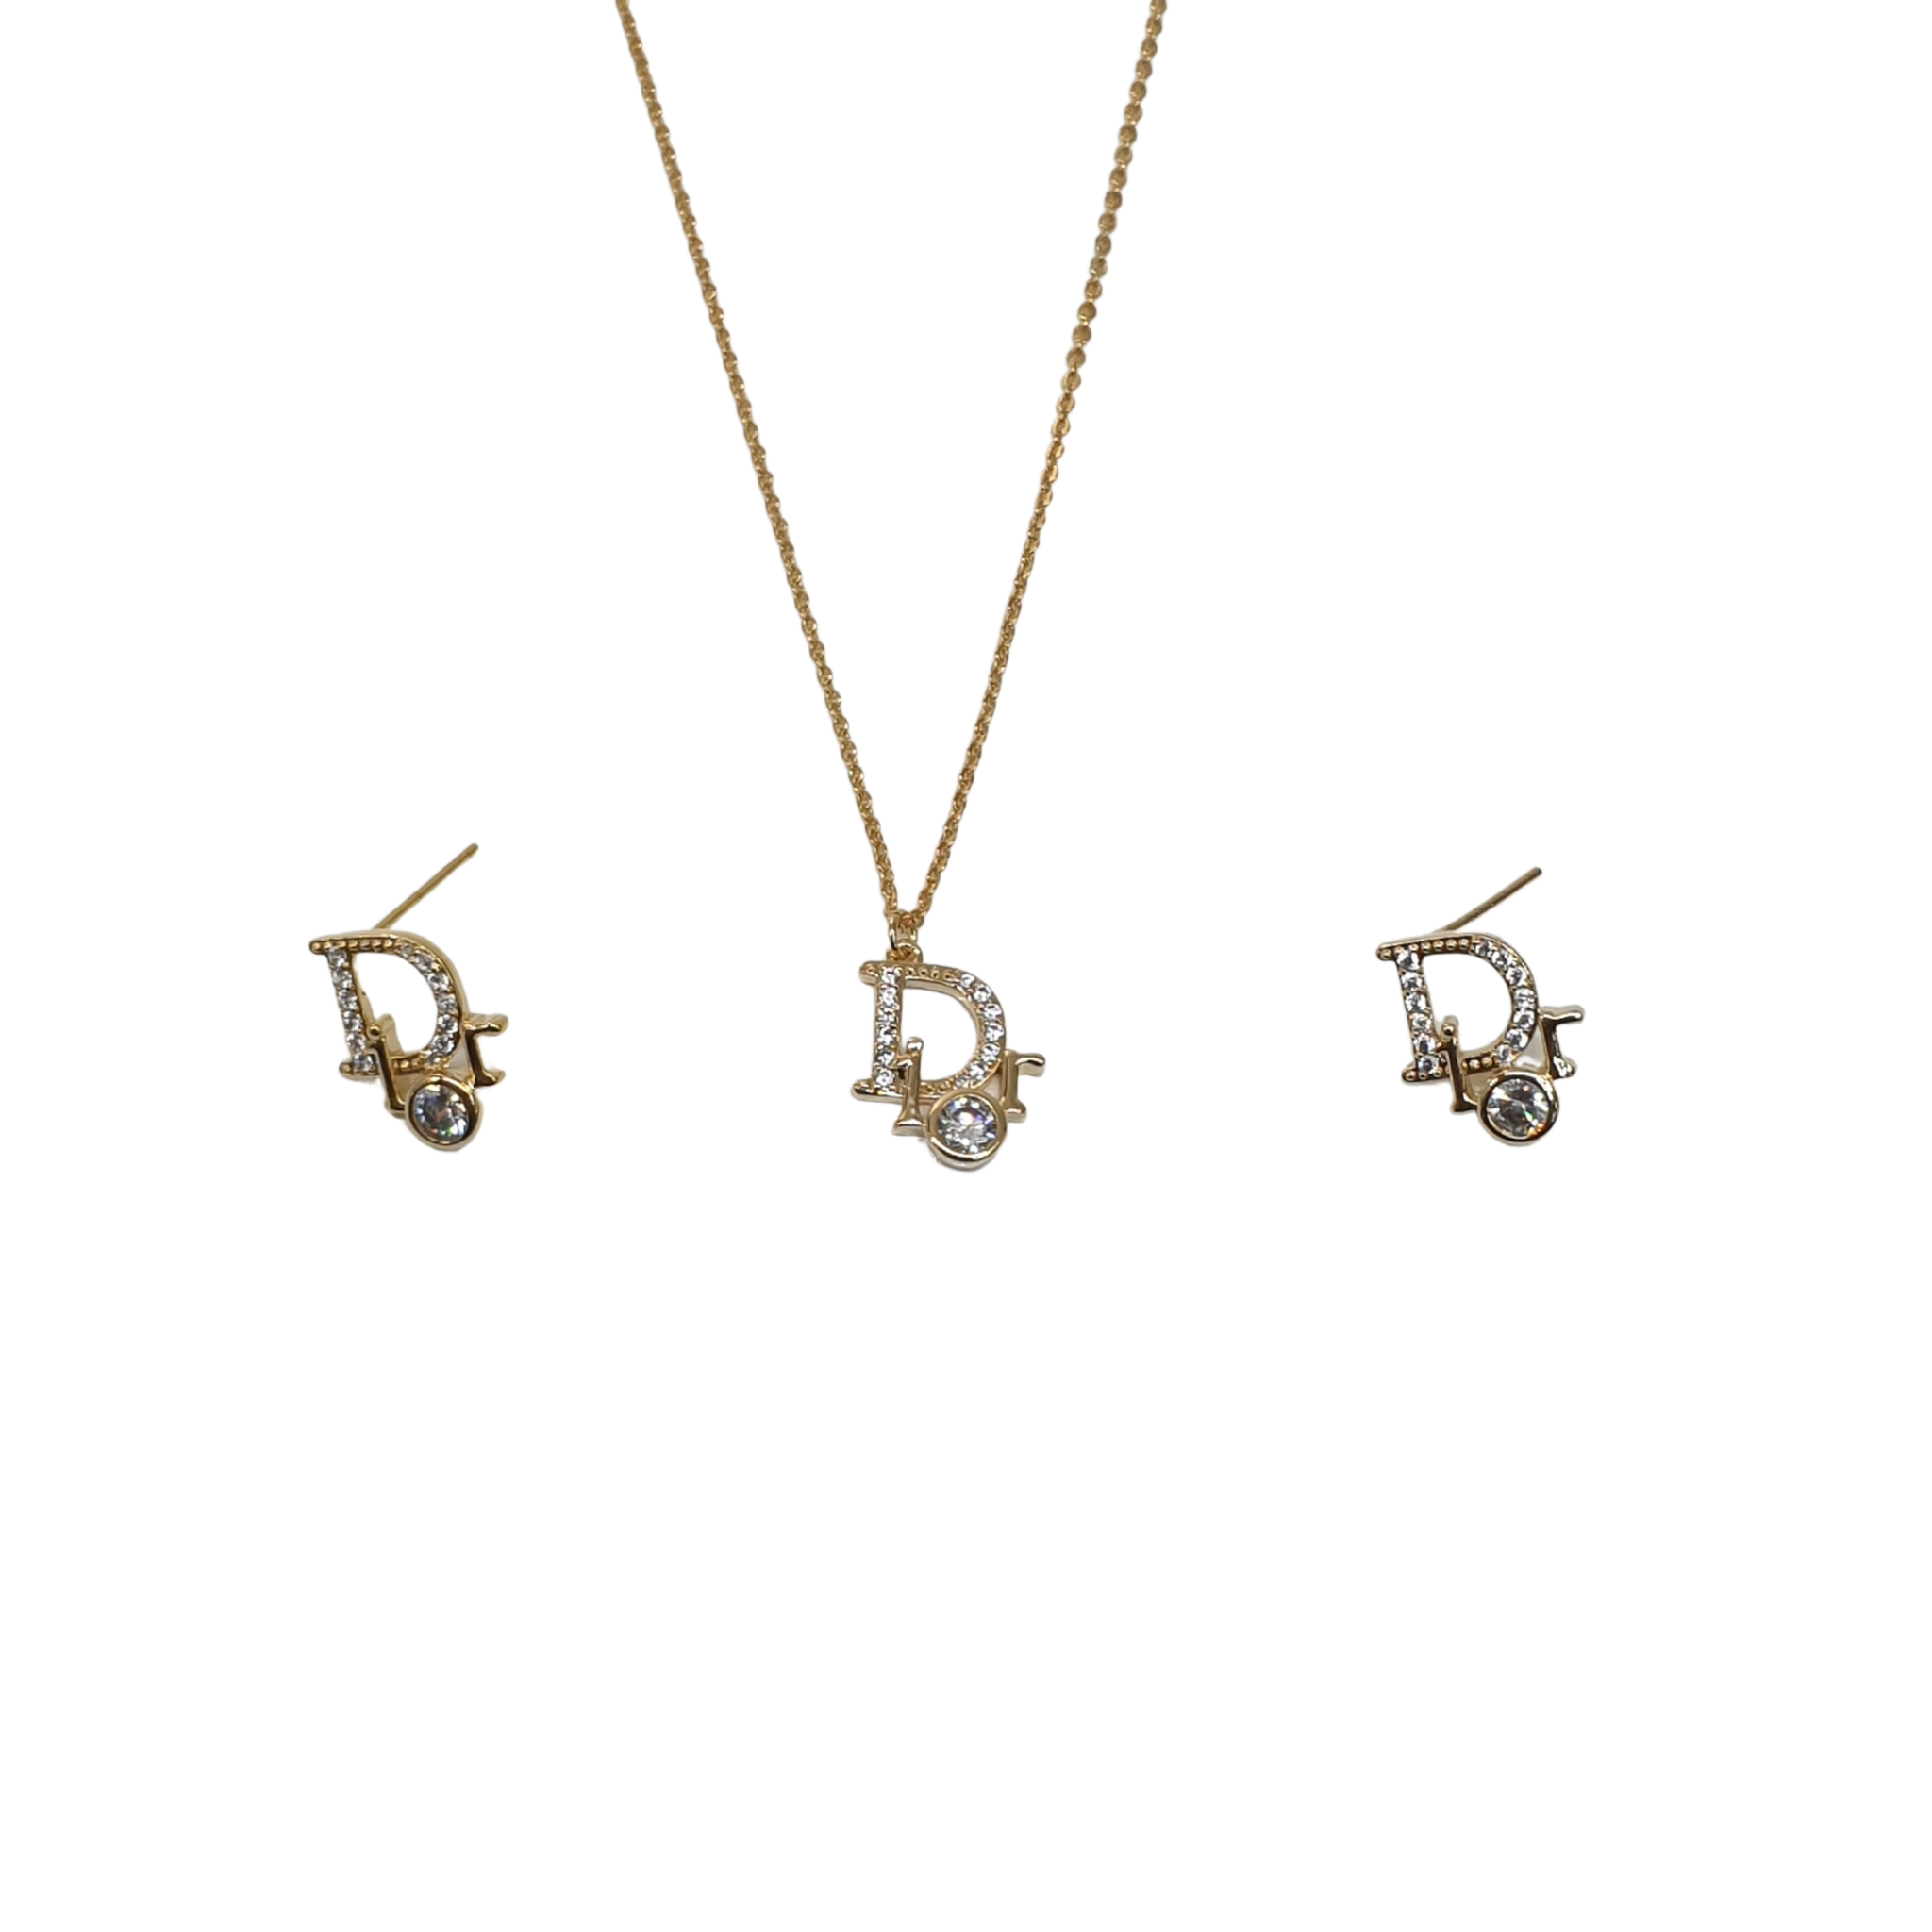 Dior necklace earring set